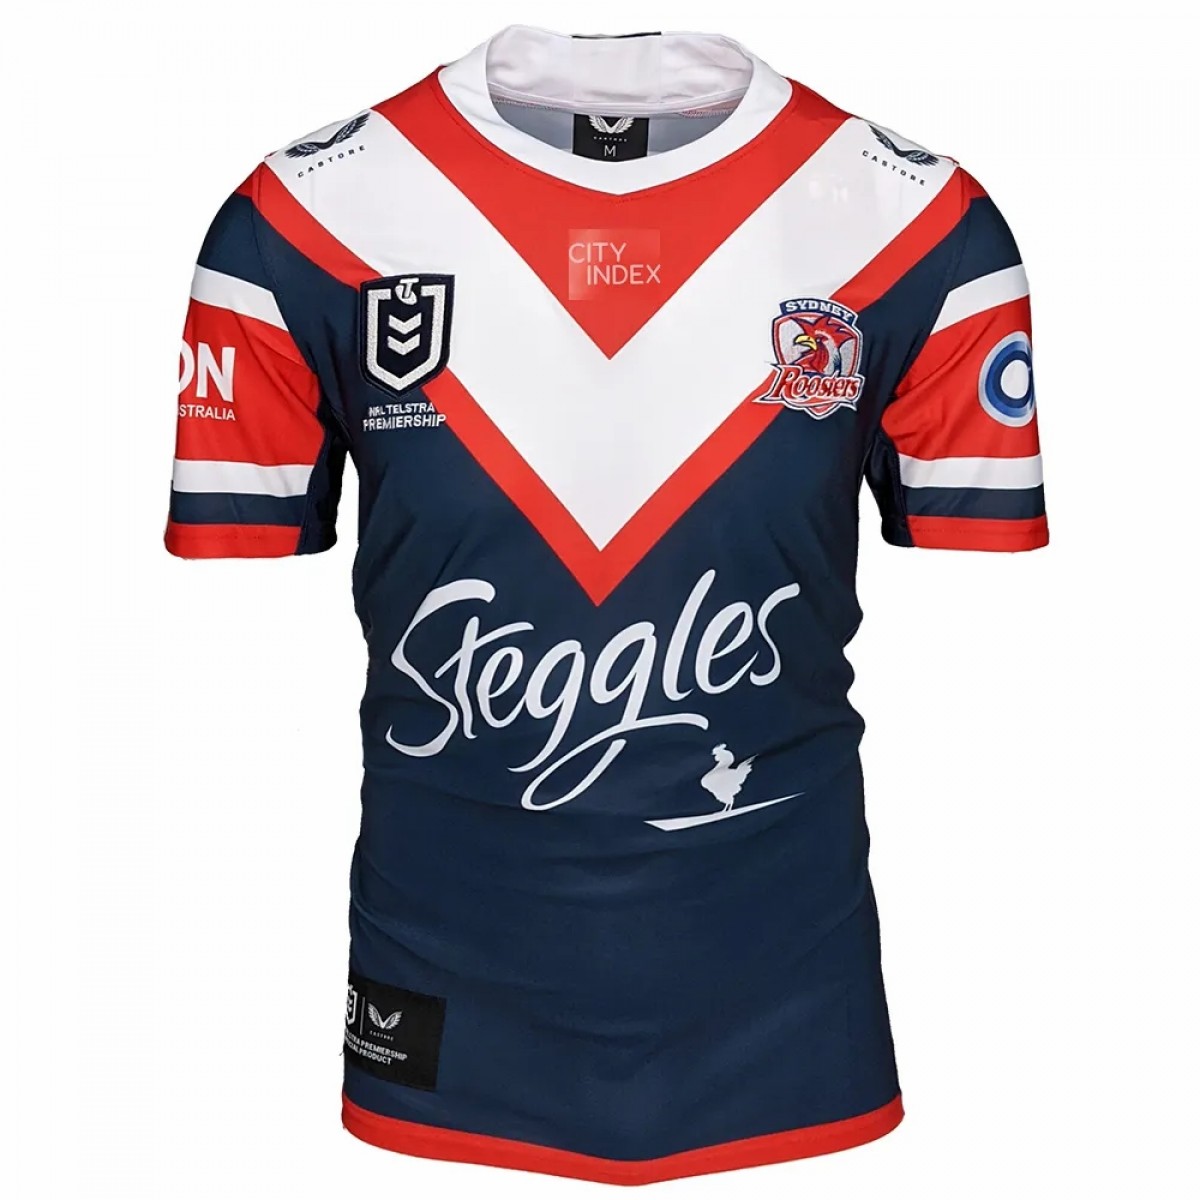 Sydney Roosters NRL 2021 Fishfinder Fishing Shirt Polo Sizes S-5XL! 